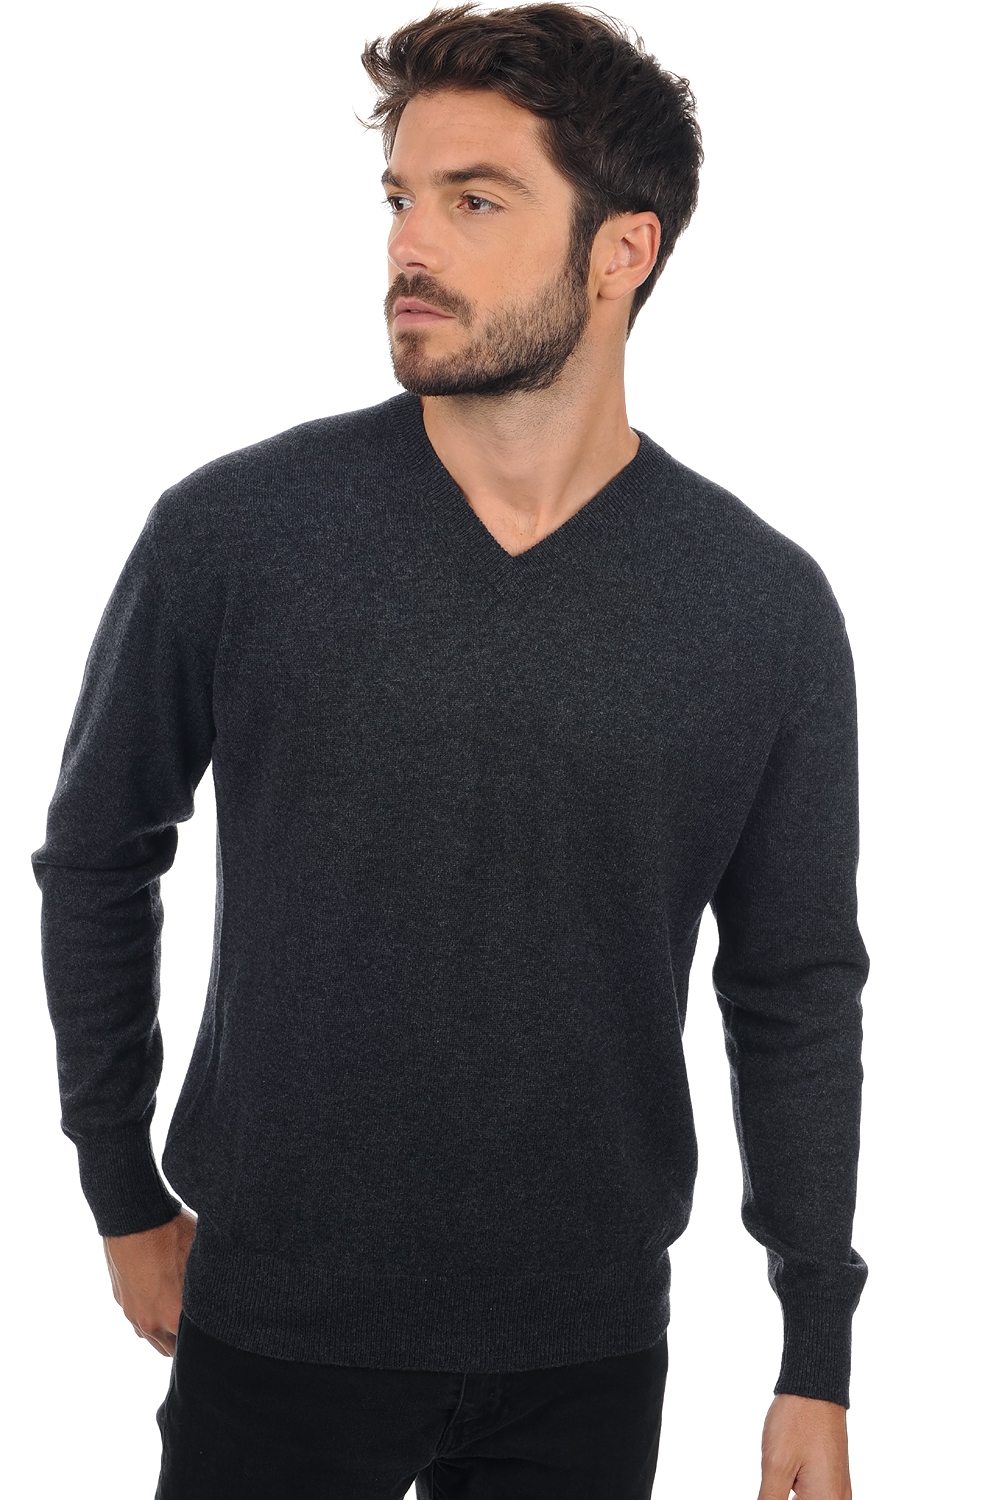 Cachemire pull homme hippolyte anthracite chine 2xl